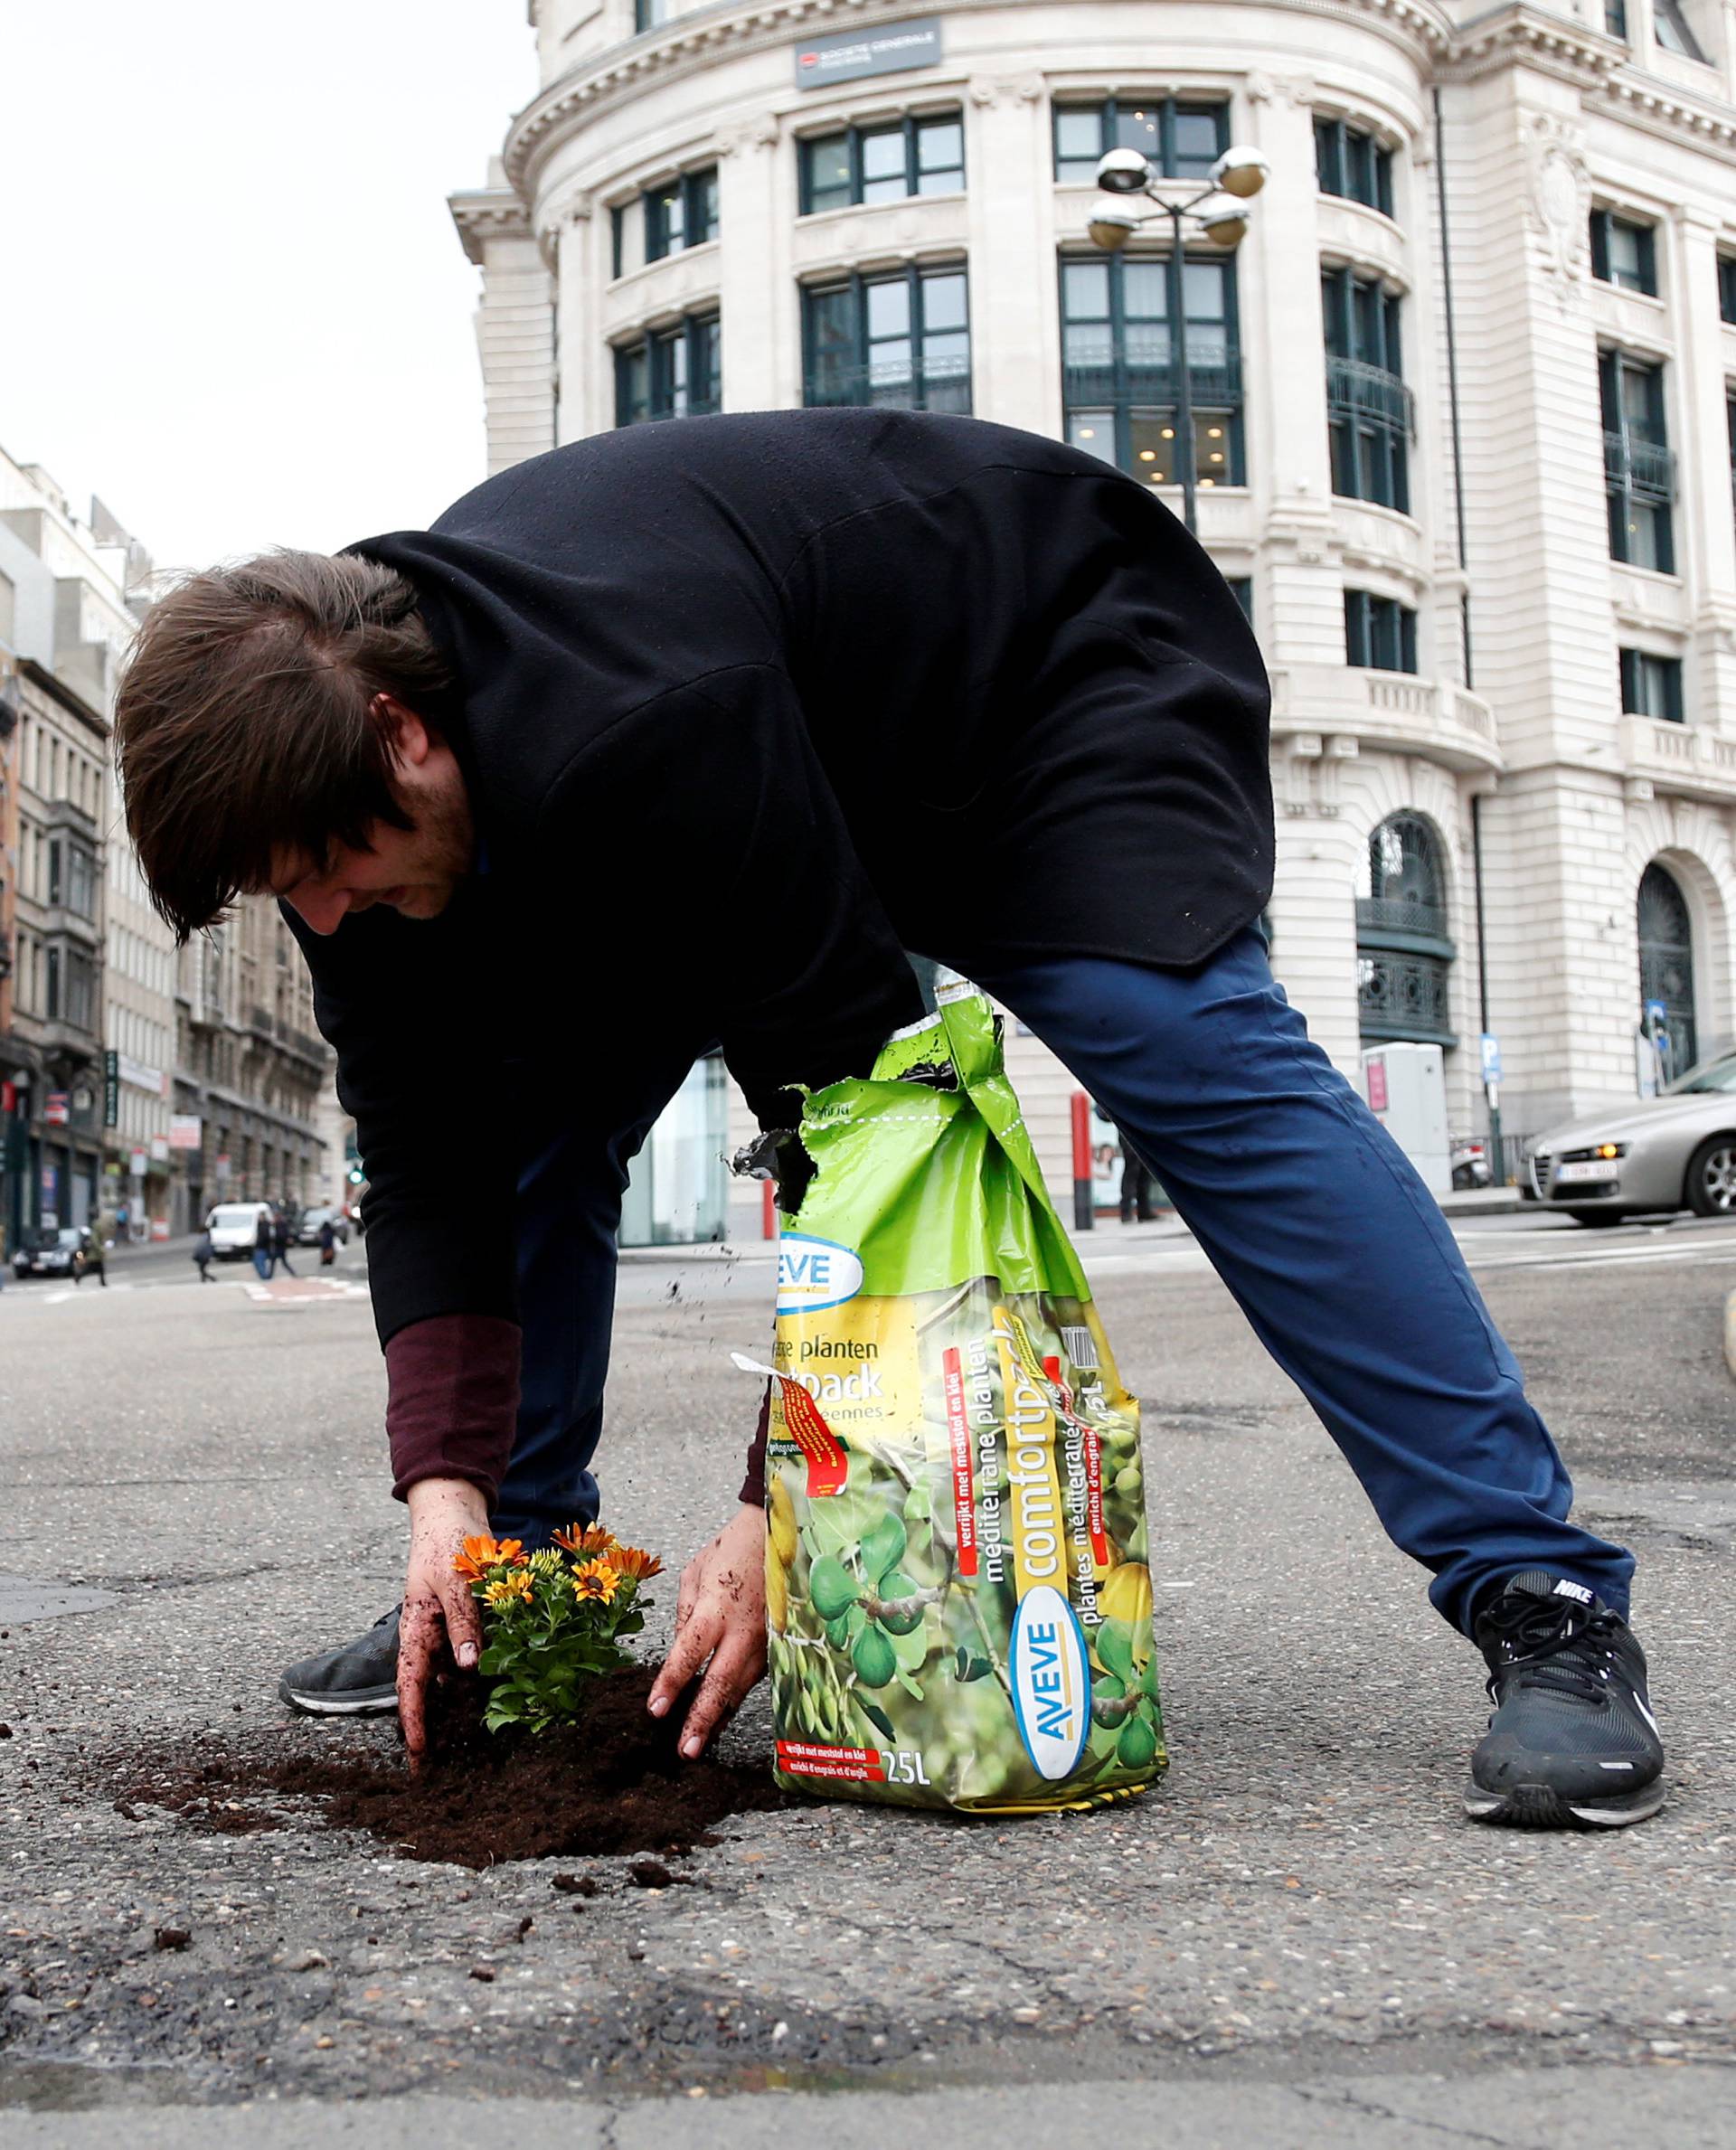 Brussels resident Anton Schuurmans plants flowers in an unrepaired pothole to draw attention to the bad state of public roads in Brussels